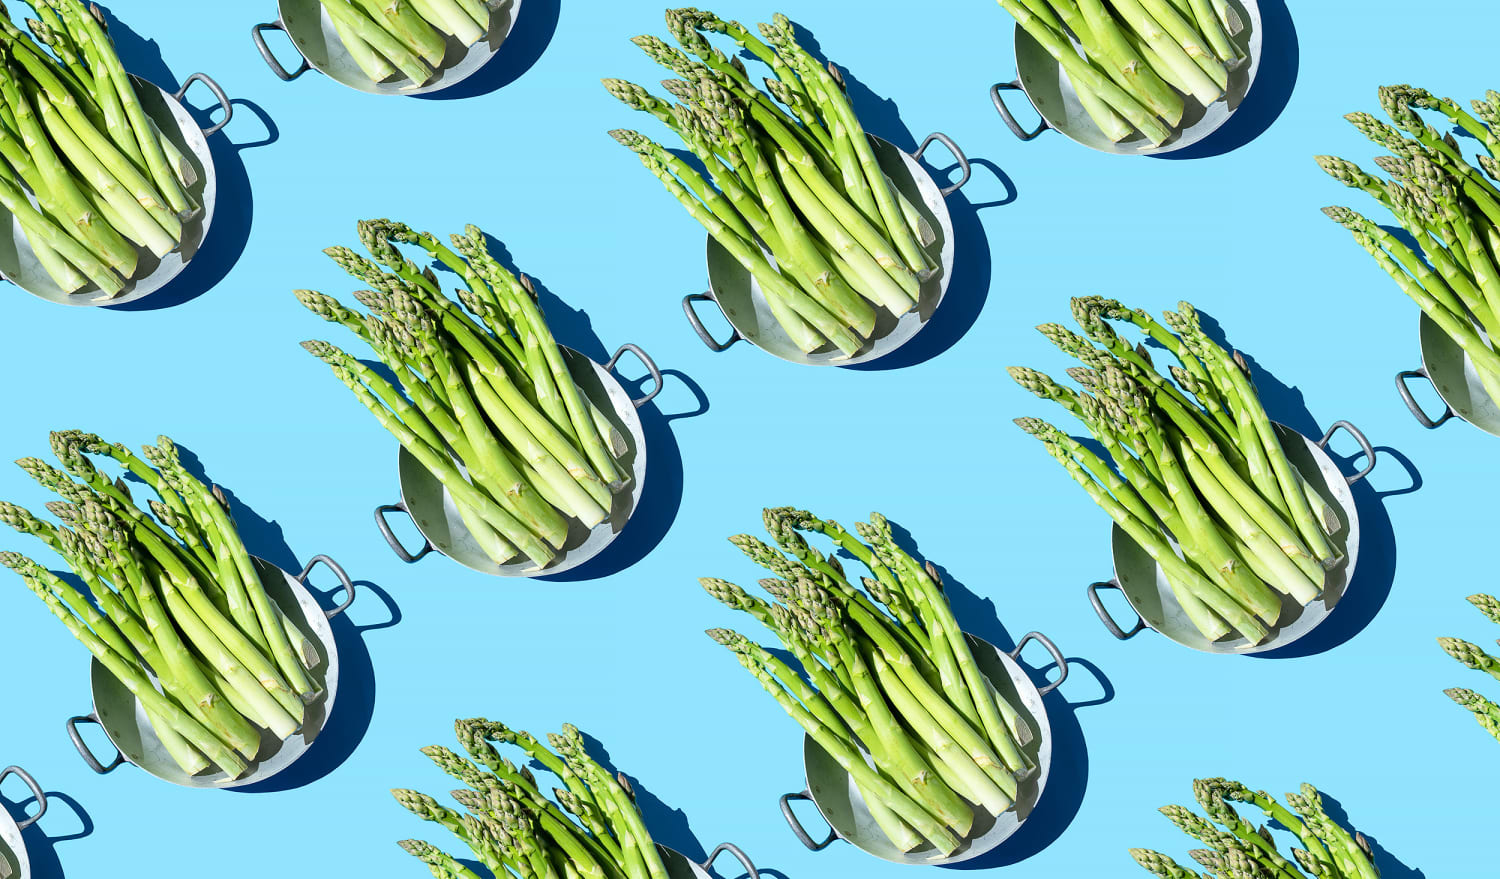 Does asparagus make your pee smell weird? Here's what that means about your health